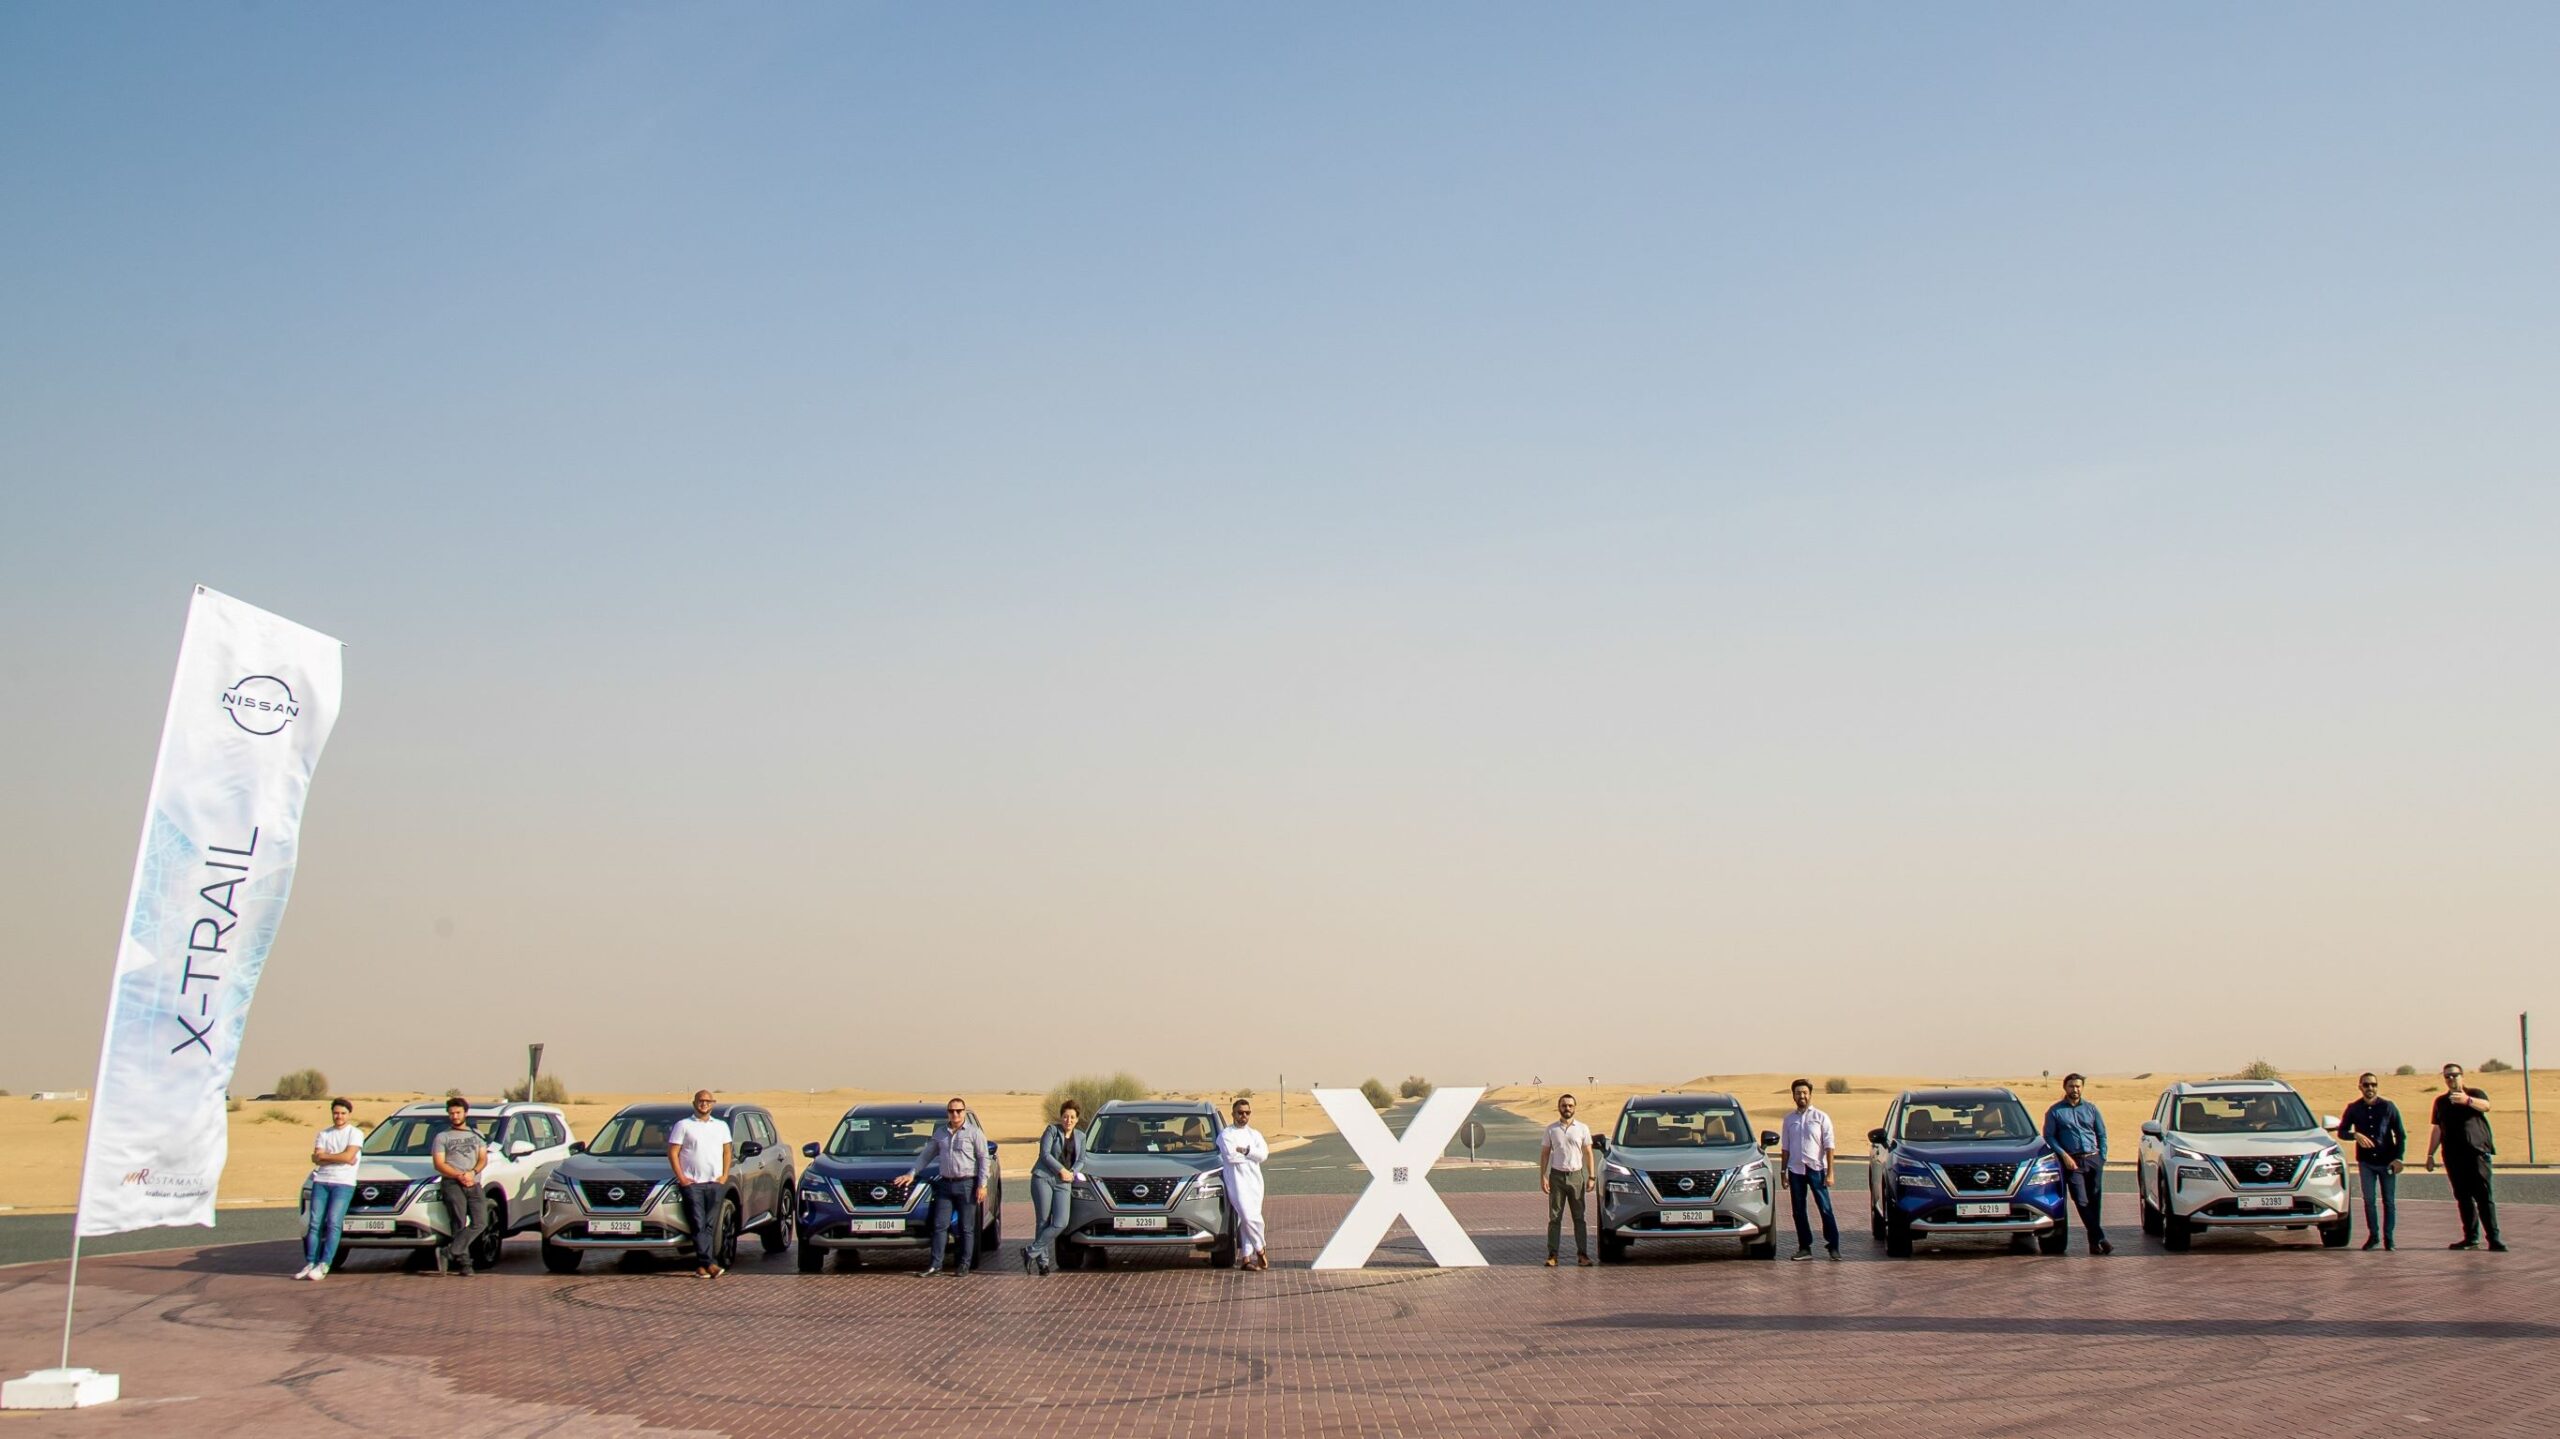 X-Trail from Nissan of Arabian Automobiles Embarks on a Journey to the Unknown in the Great X-Trail Expedition